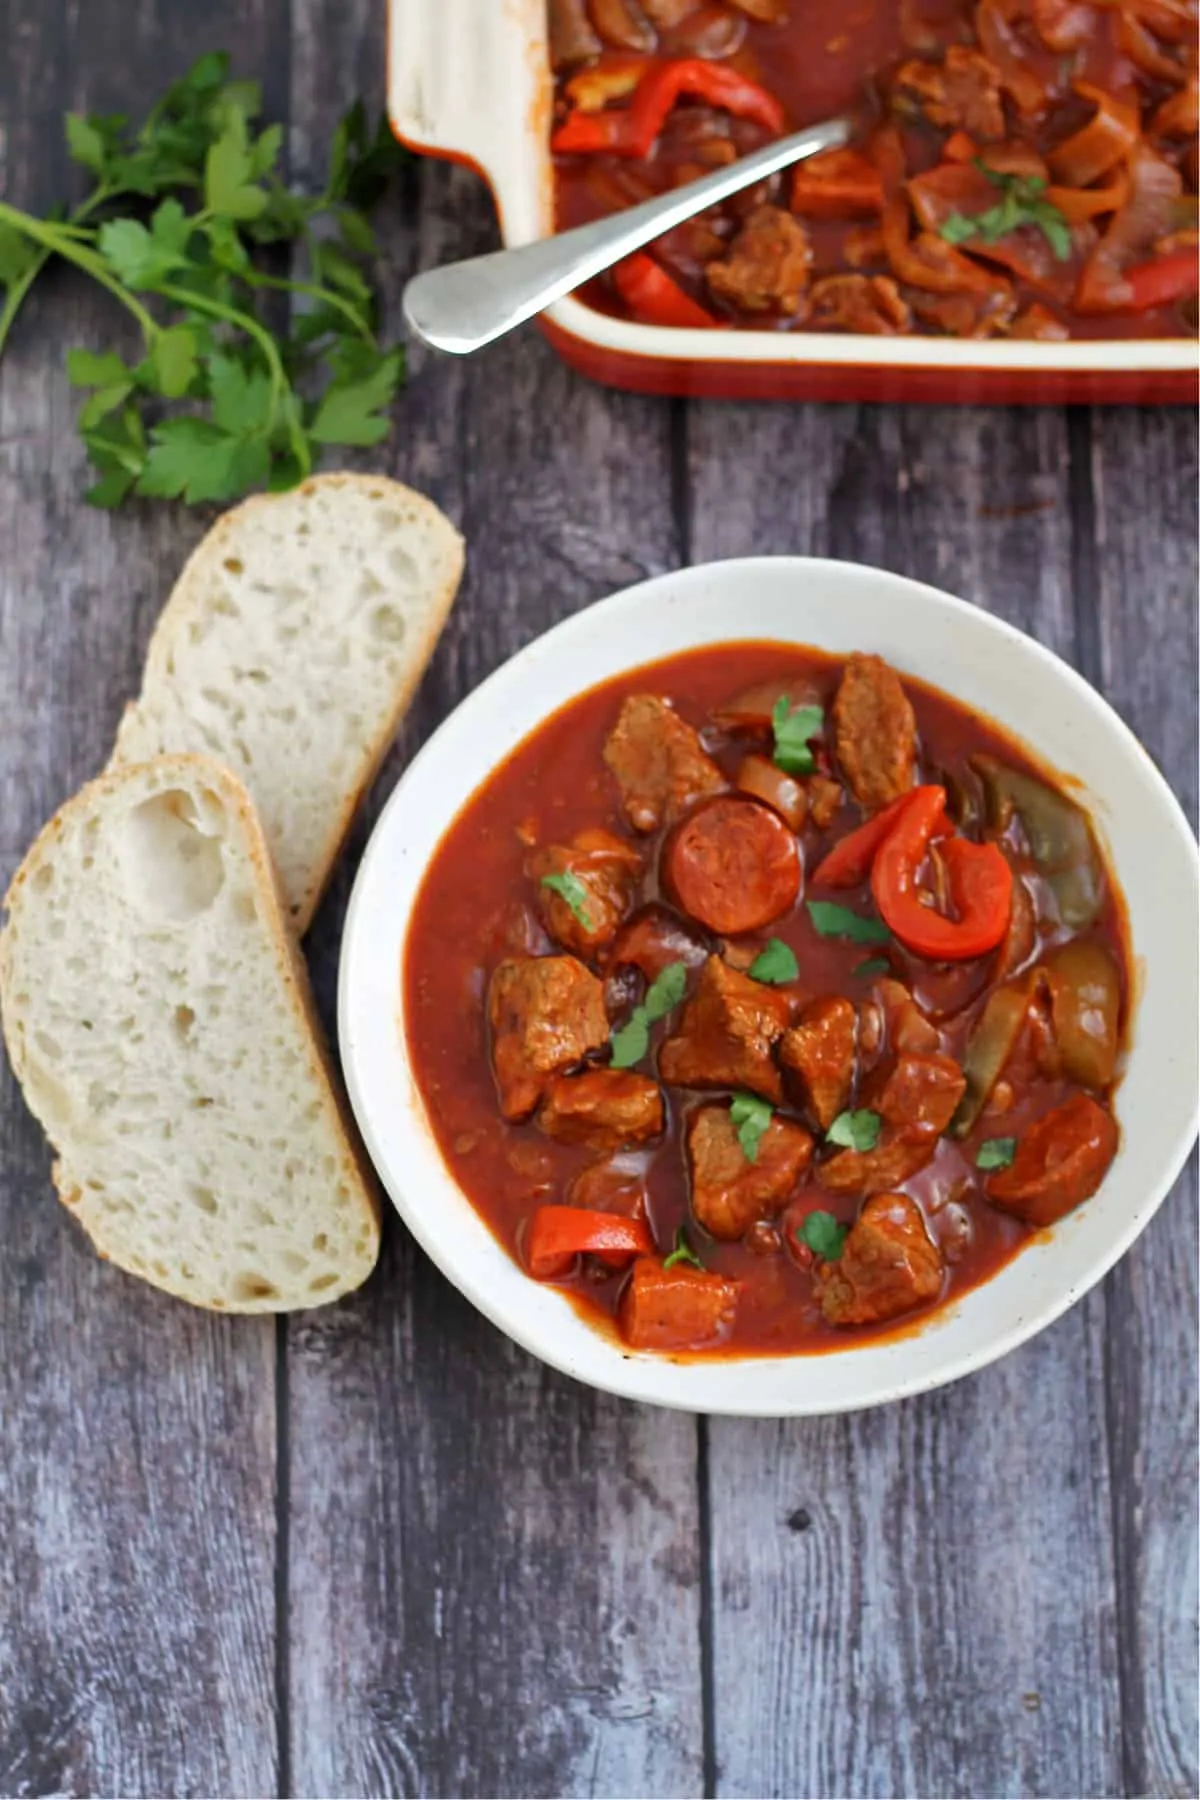 Bowl of beef casserole served with crusty bread on the side, with herbs and serving dish behind.